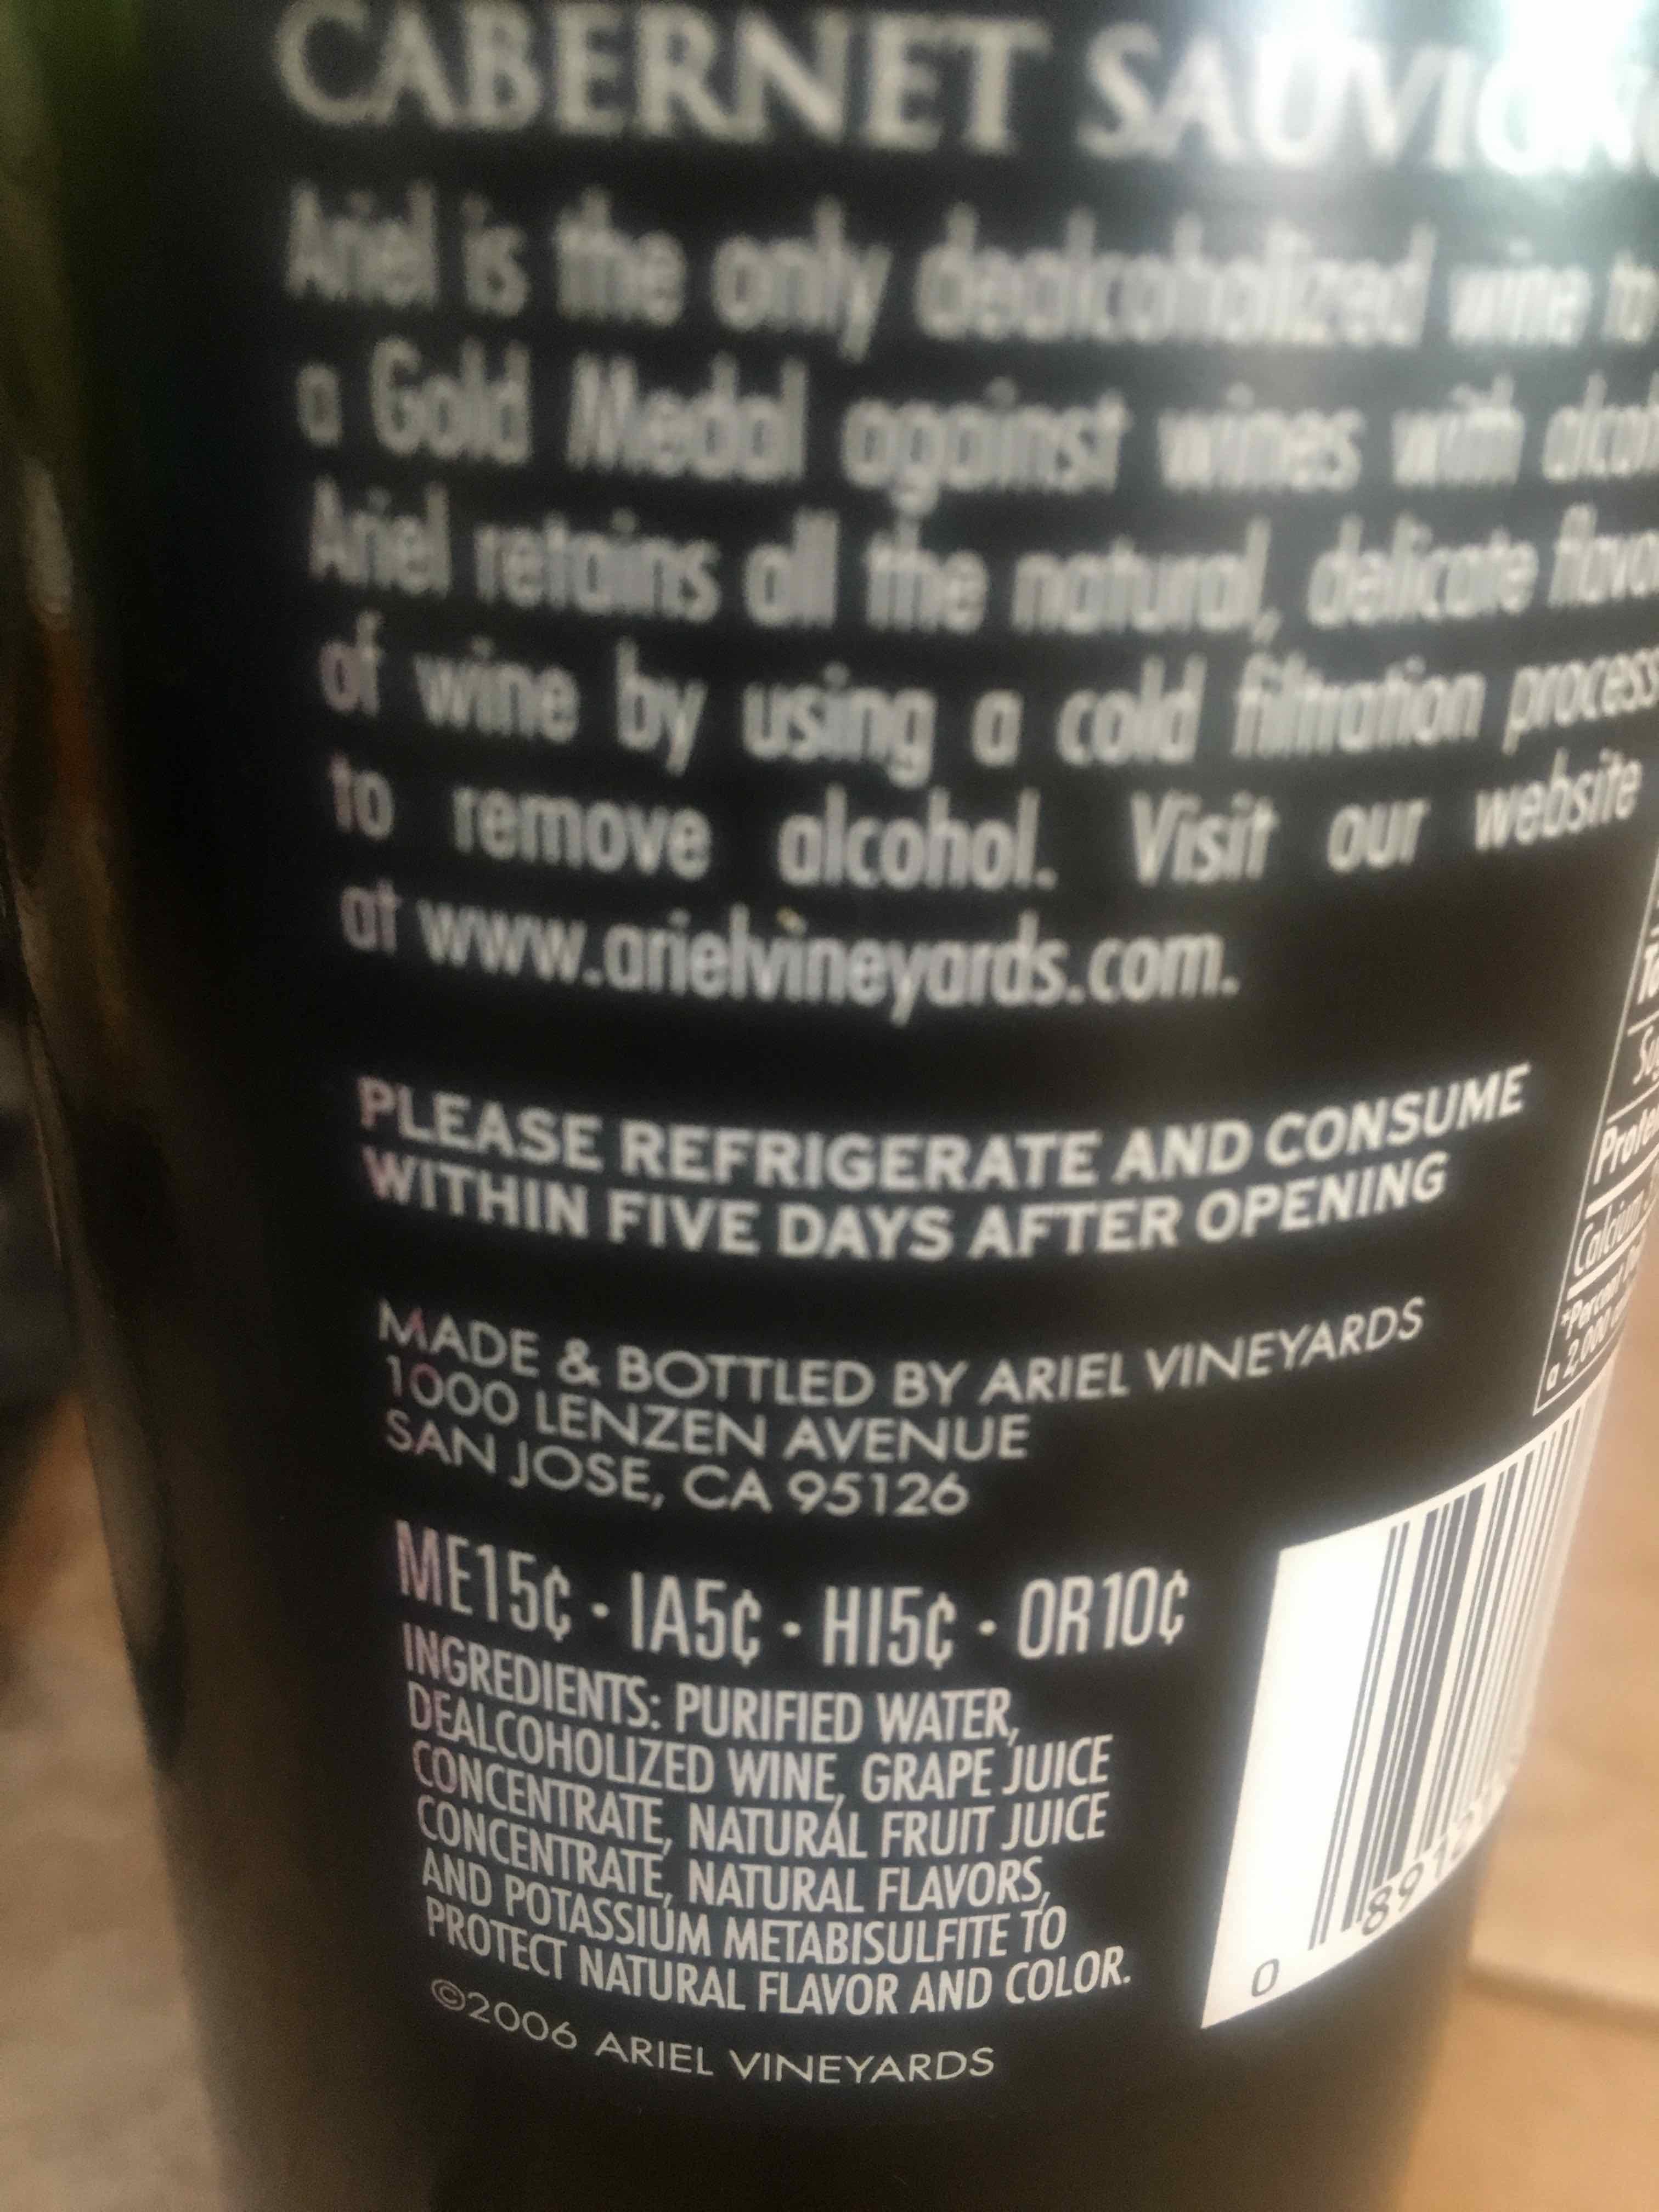 Dealcoholized wine - Can I have ___? - Whole30